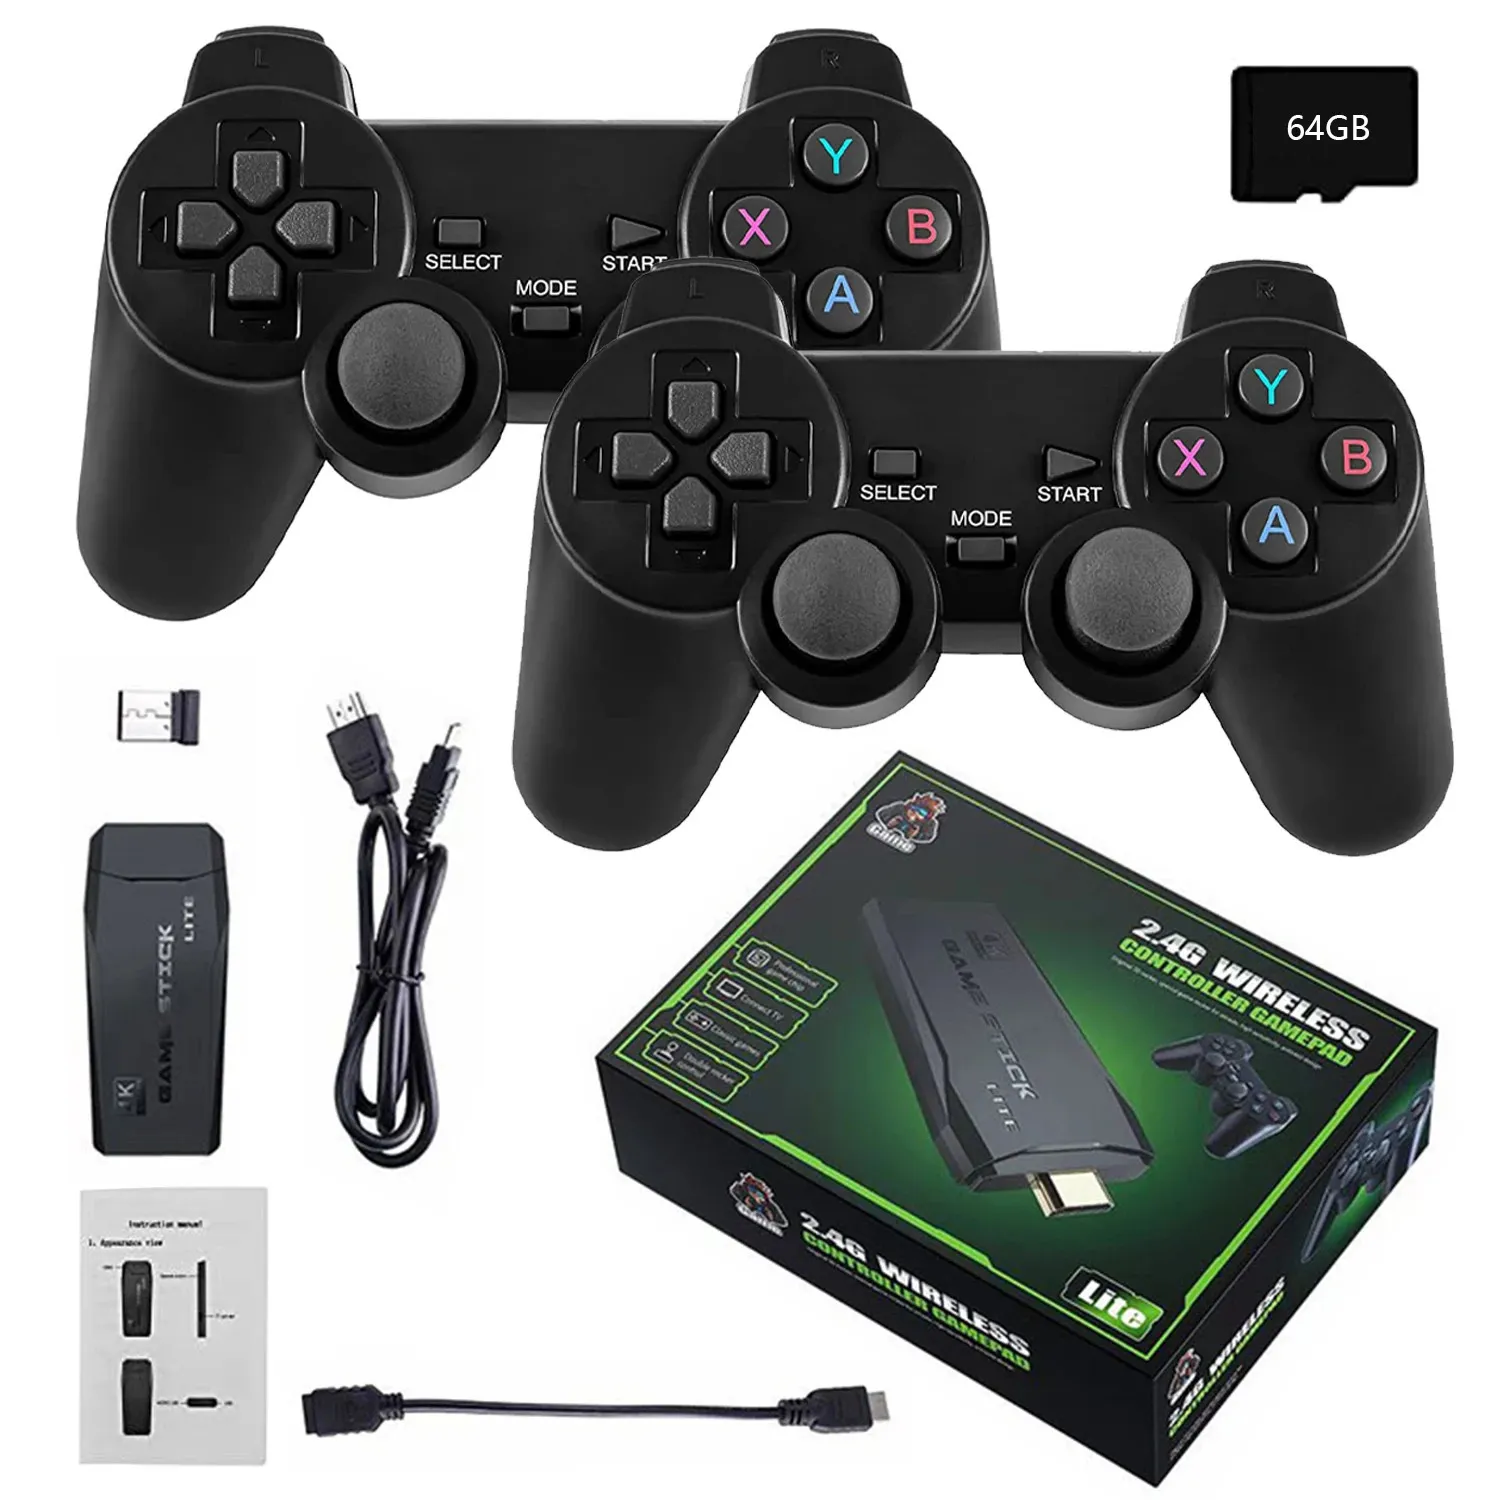 Game Controllers Joysticks 4K video game console 24G dual wireless controller stick suitable for PS1 10000 games 64GB vintage boy Christmas gift 231120